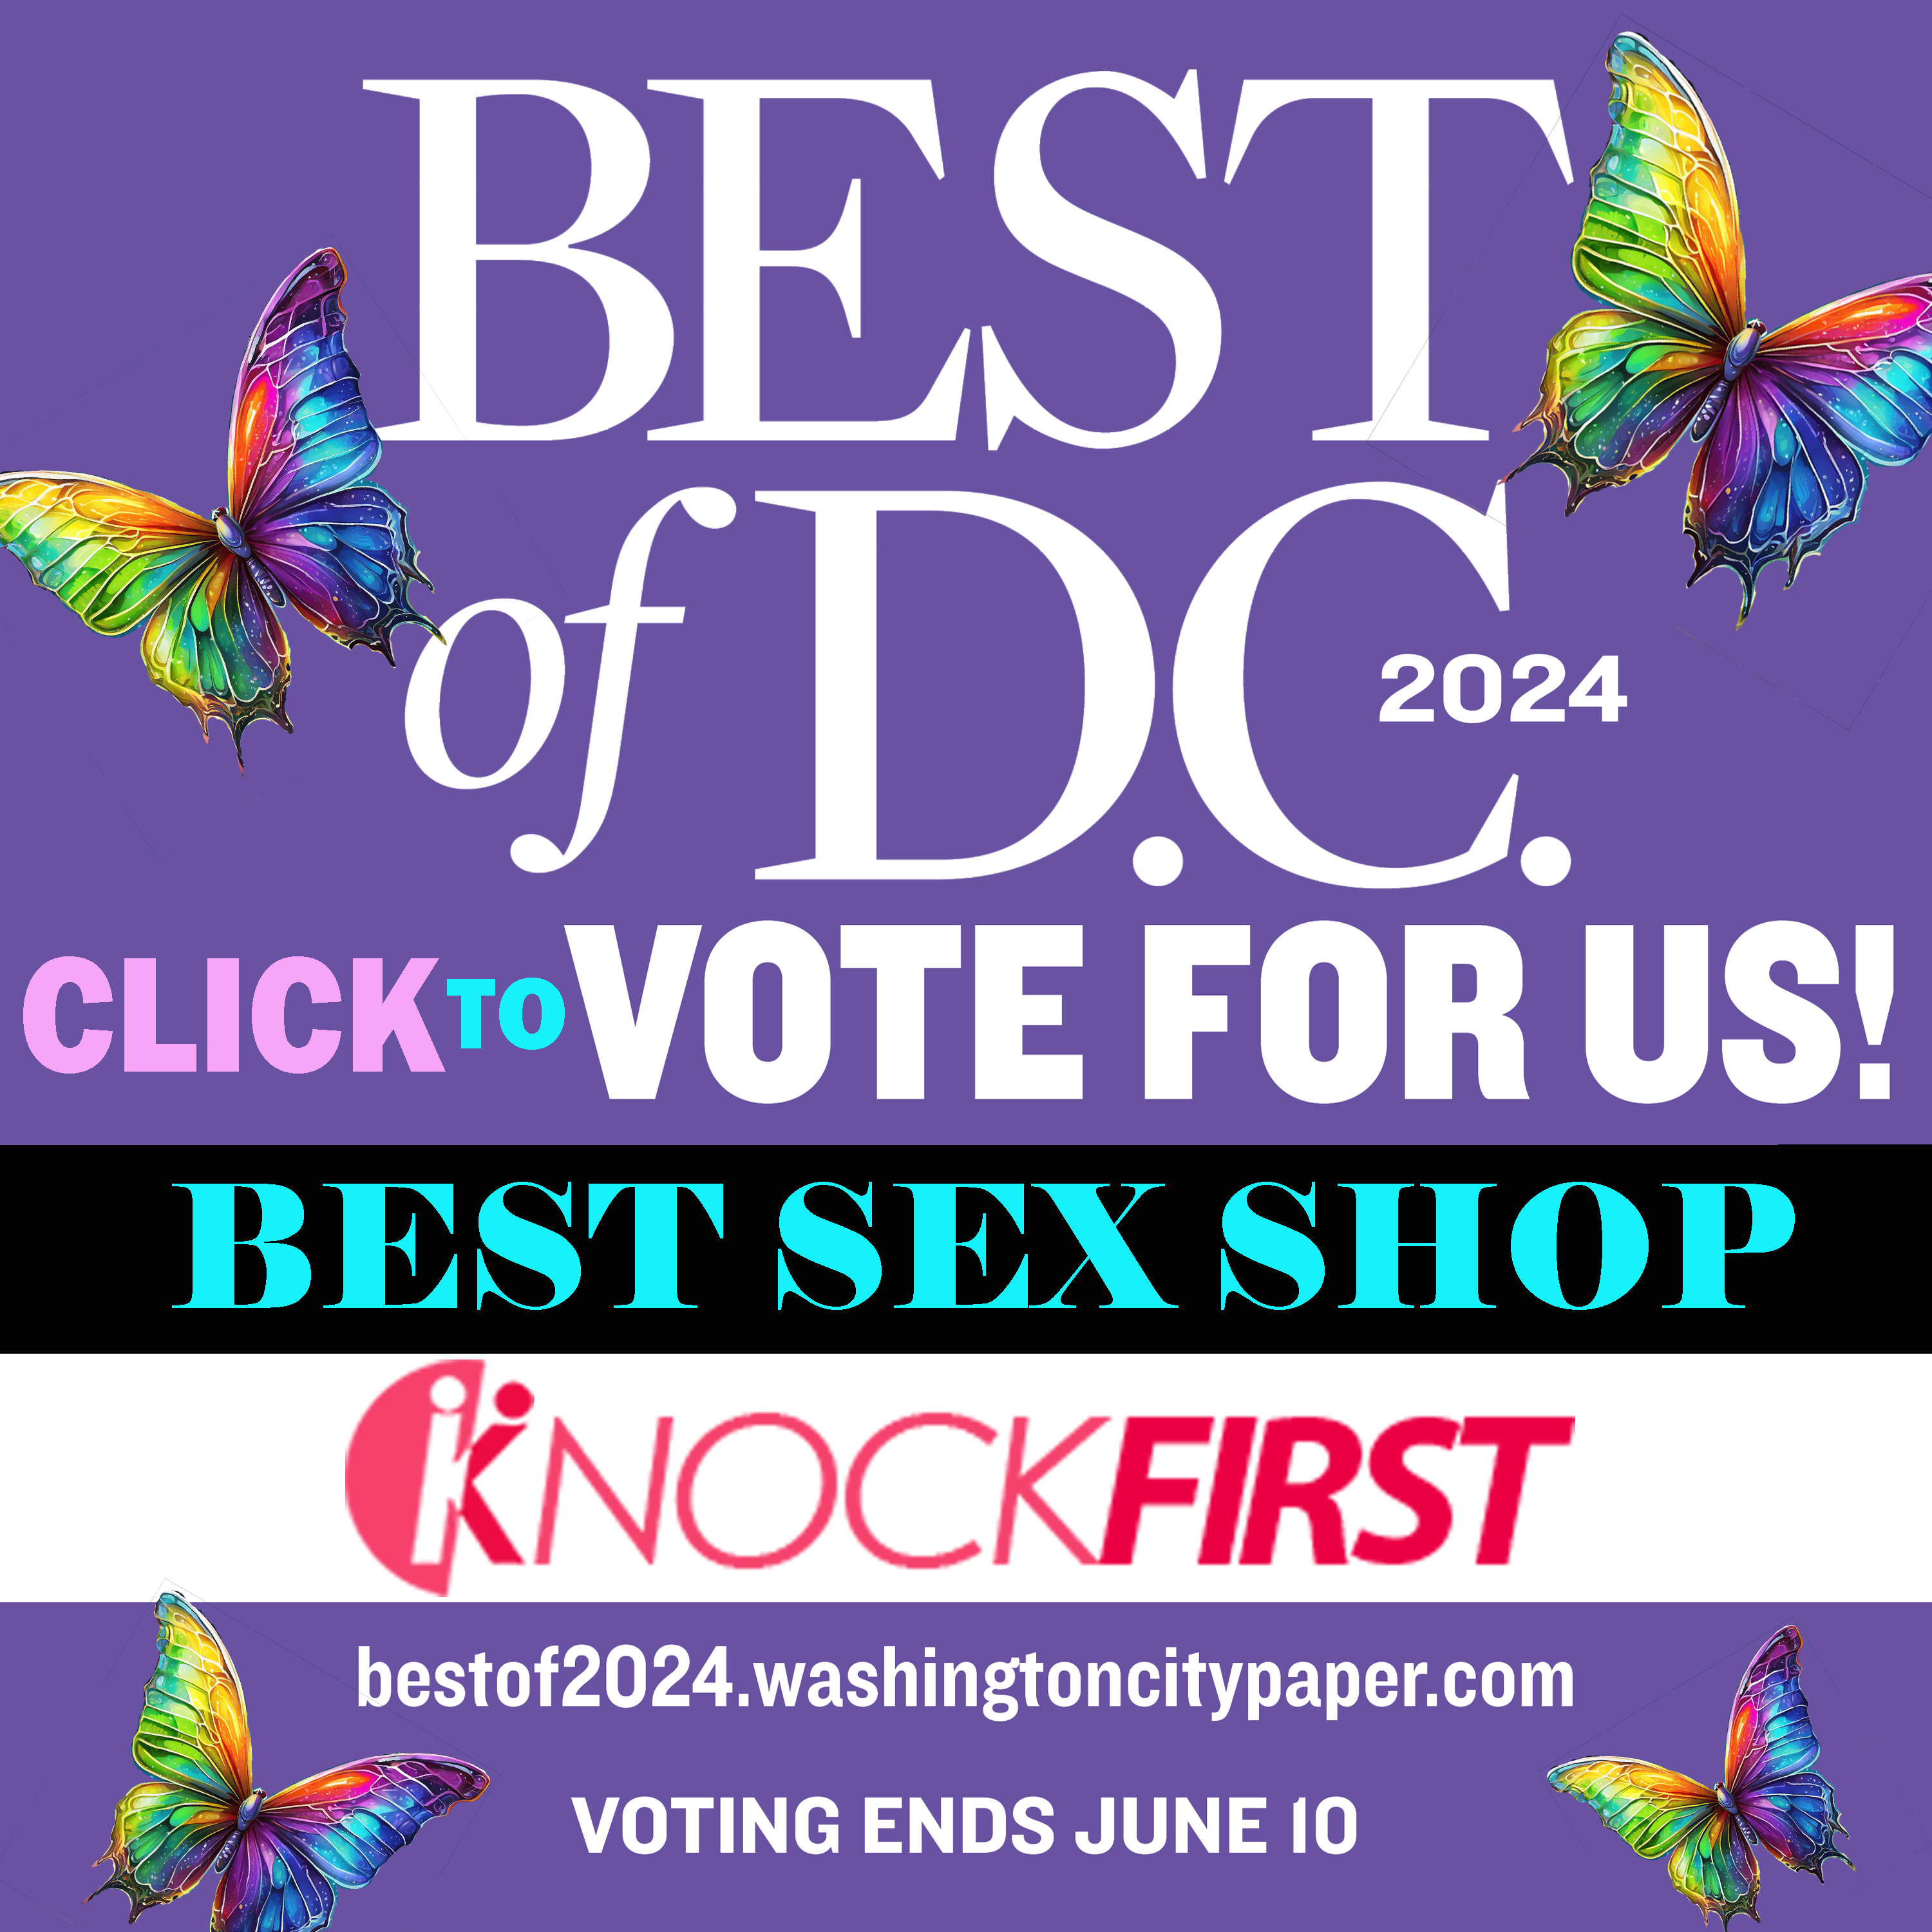 VOTE FOR US